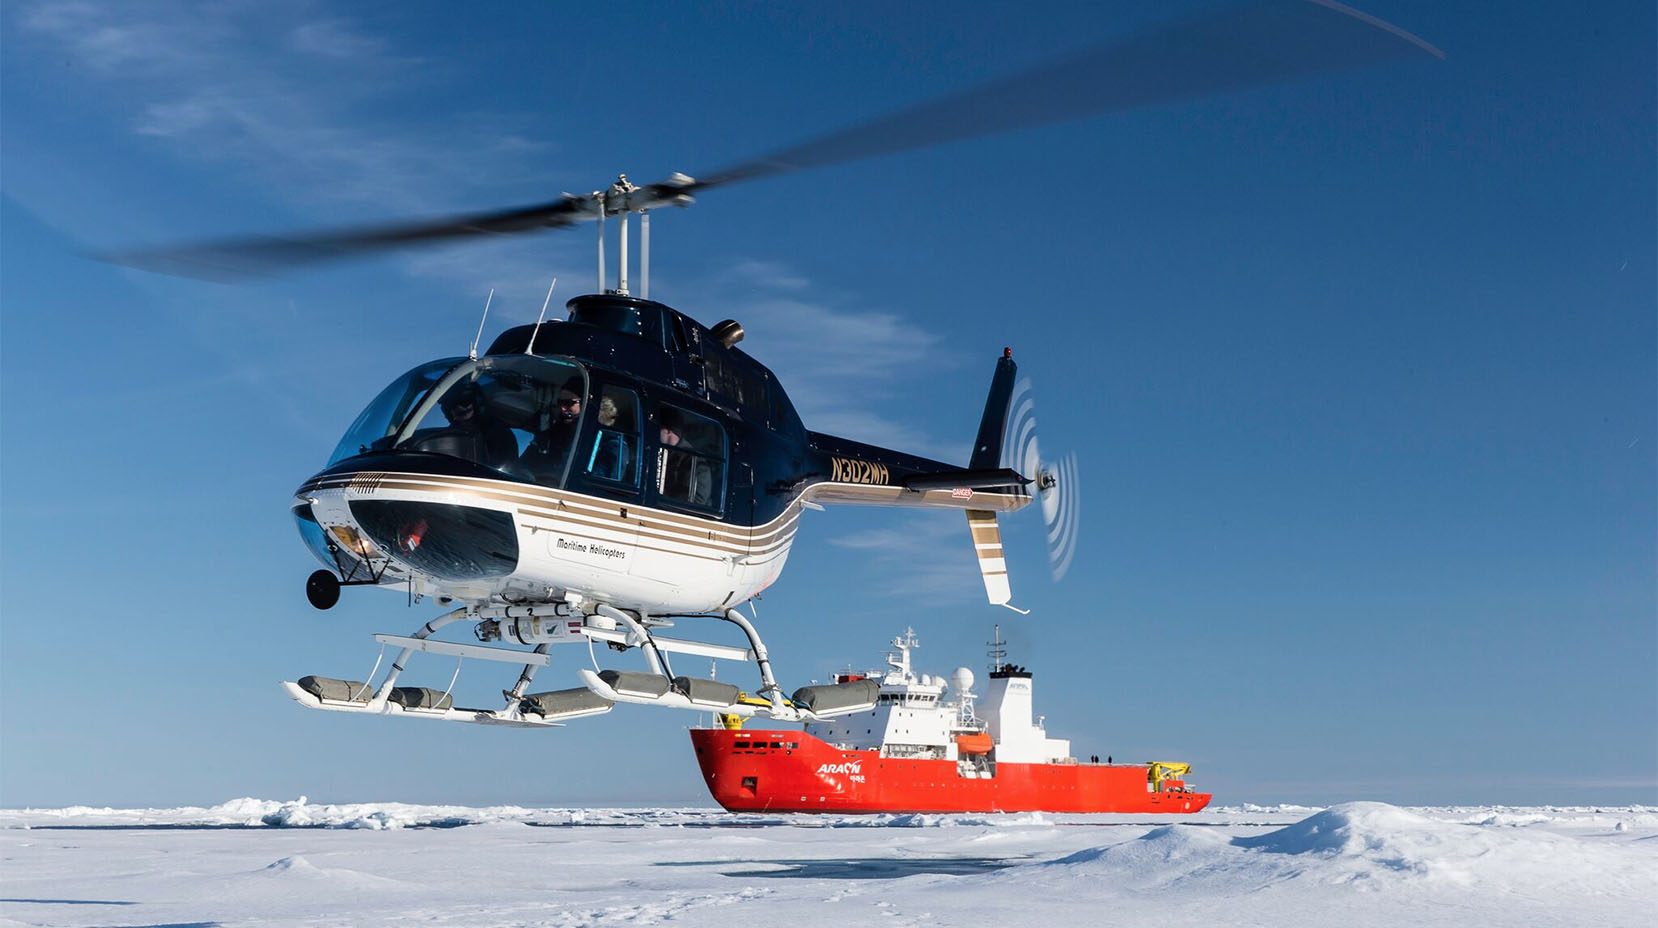 Maritime Helicopters at work in the high arctic